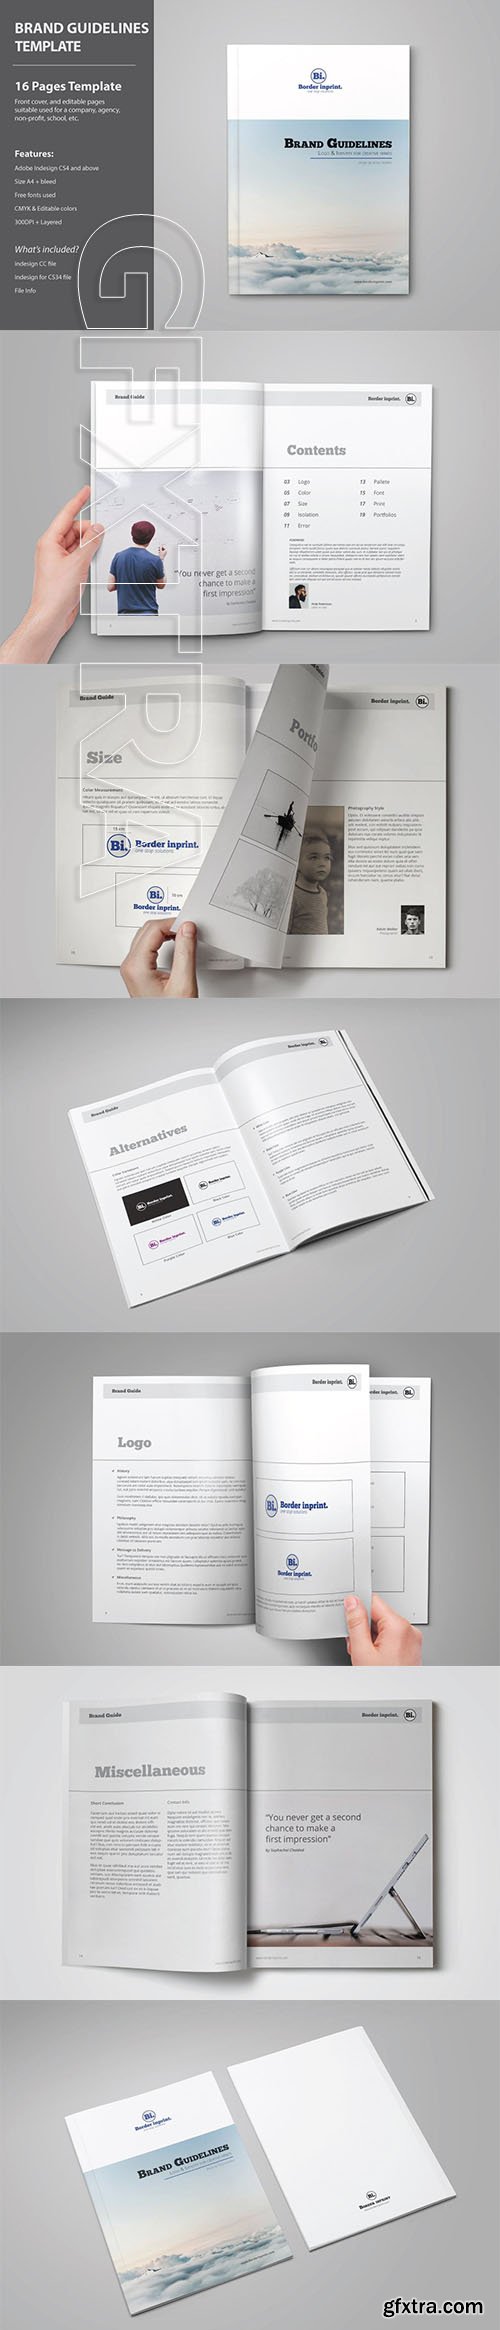 CreativeMarket - Brand Guidelines Template 3806084